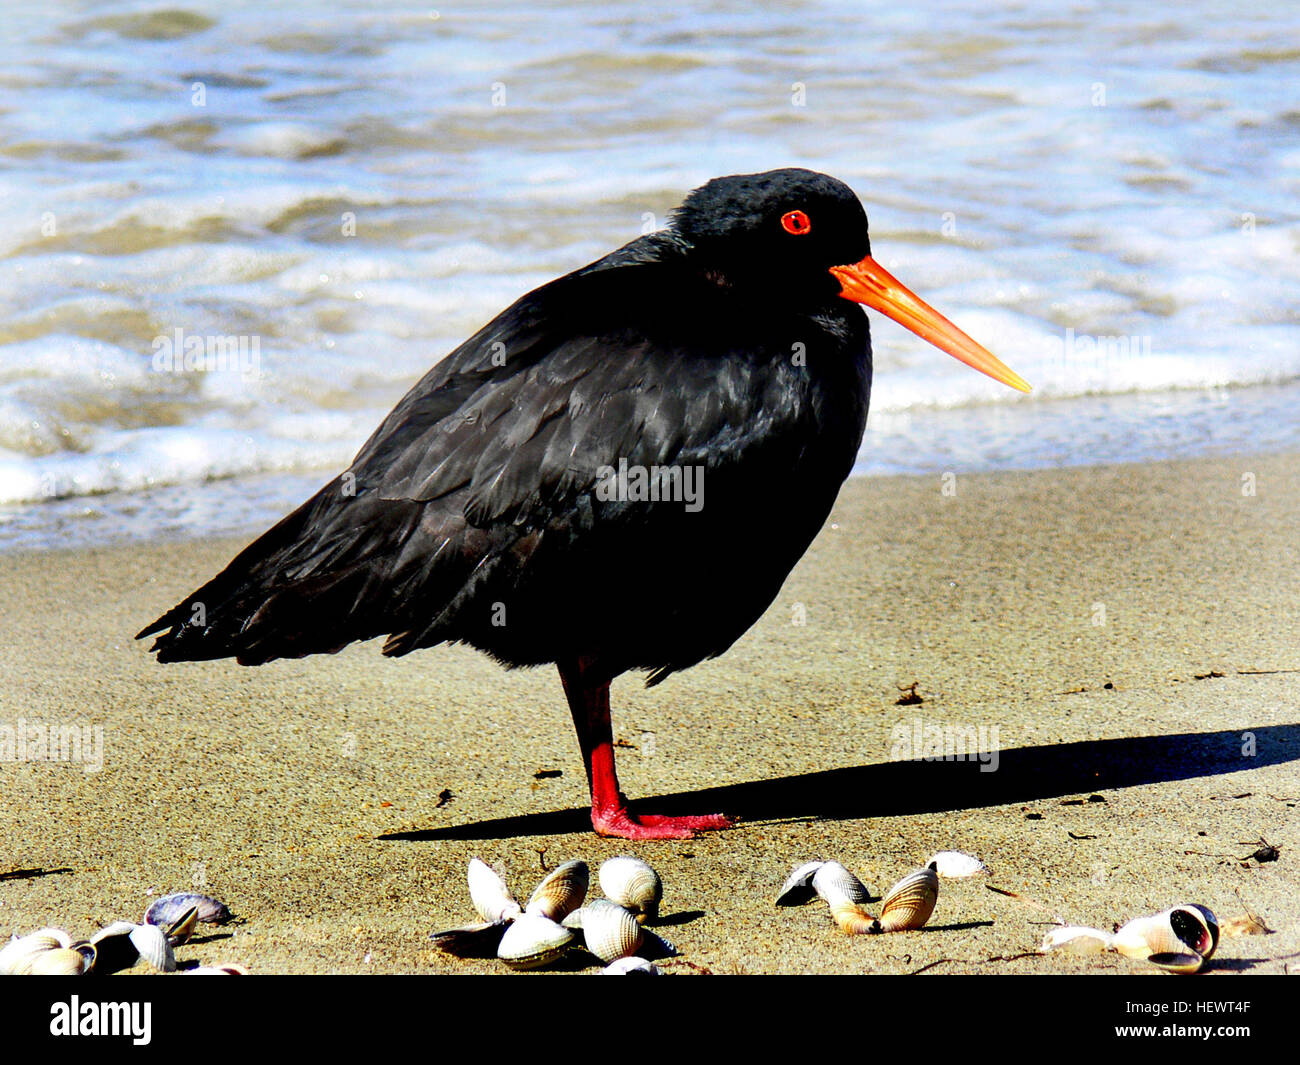 Variable oystercatcher  The variable oystercatcher (Haematopus unicolor, torea or toreapango) is found on rocky and sandy beaches. It is rare – there were around 3,500 birds in 1994, and they are found only in New Zealand.  Also known as the black oystercatcher, it varies from black and white to pure black, which is more common further south. It has a red bill and red-orange eye-ring, and pink legs. Larger than the pied oystercatcher, it measures 48 centimetres and weighs 725 grams. Stock Photo